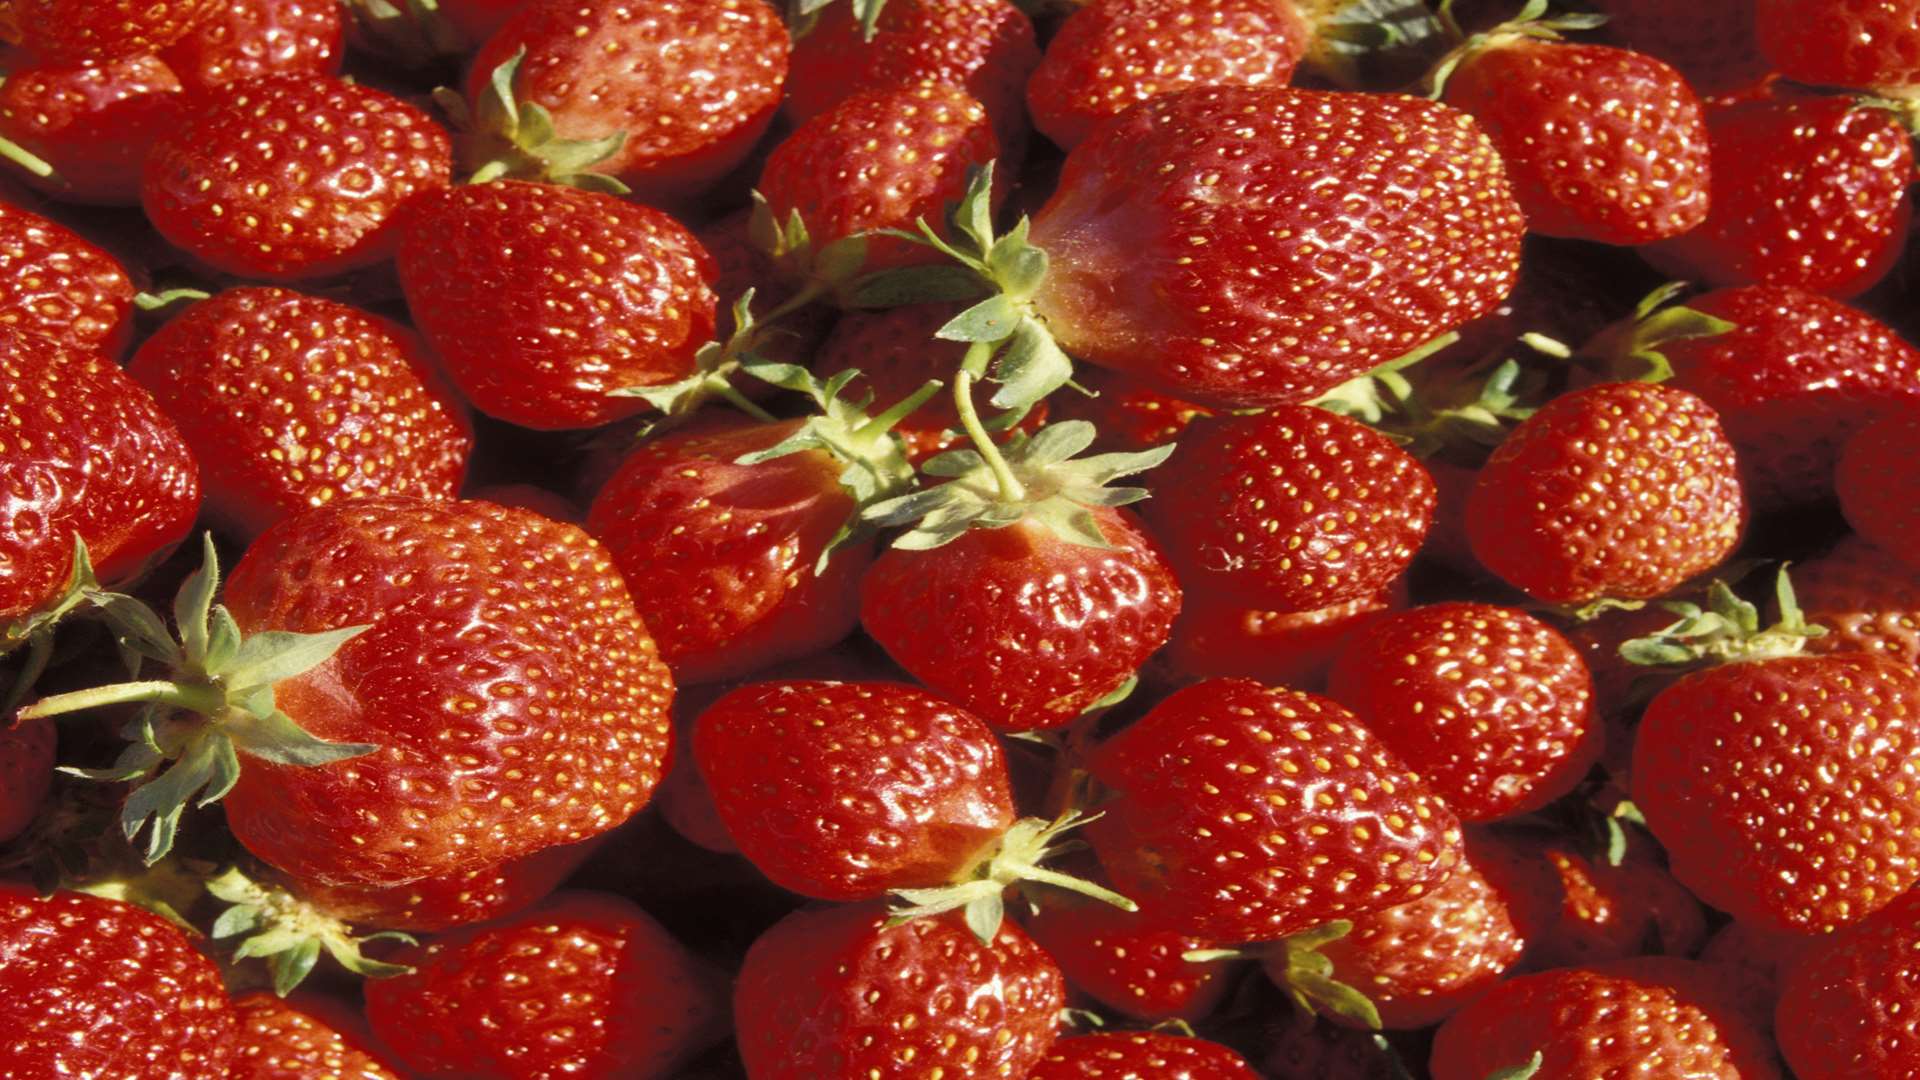 Thousands of pounds worth of strawberries and cherries were stolen.